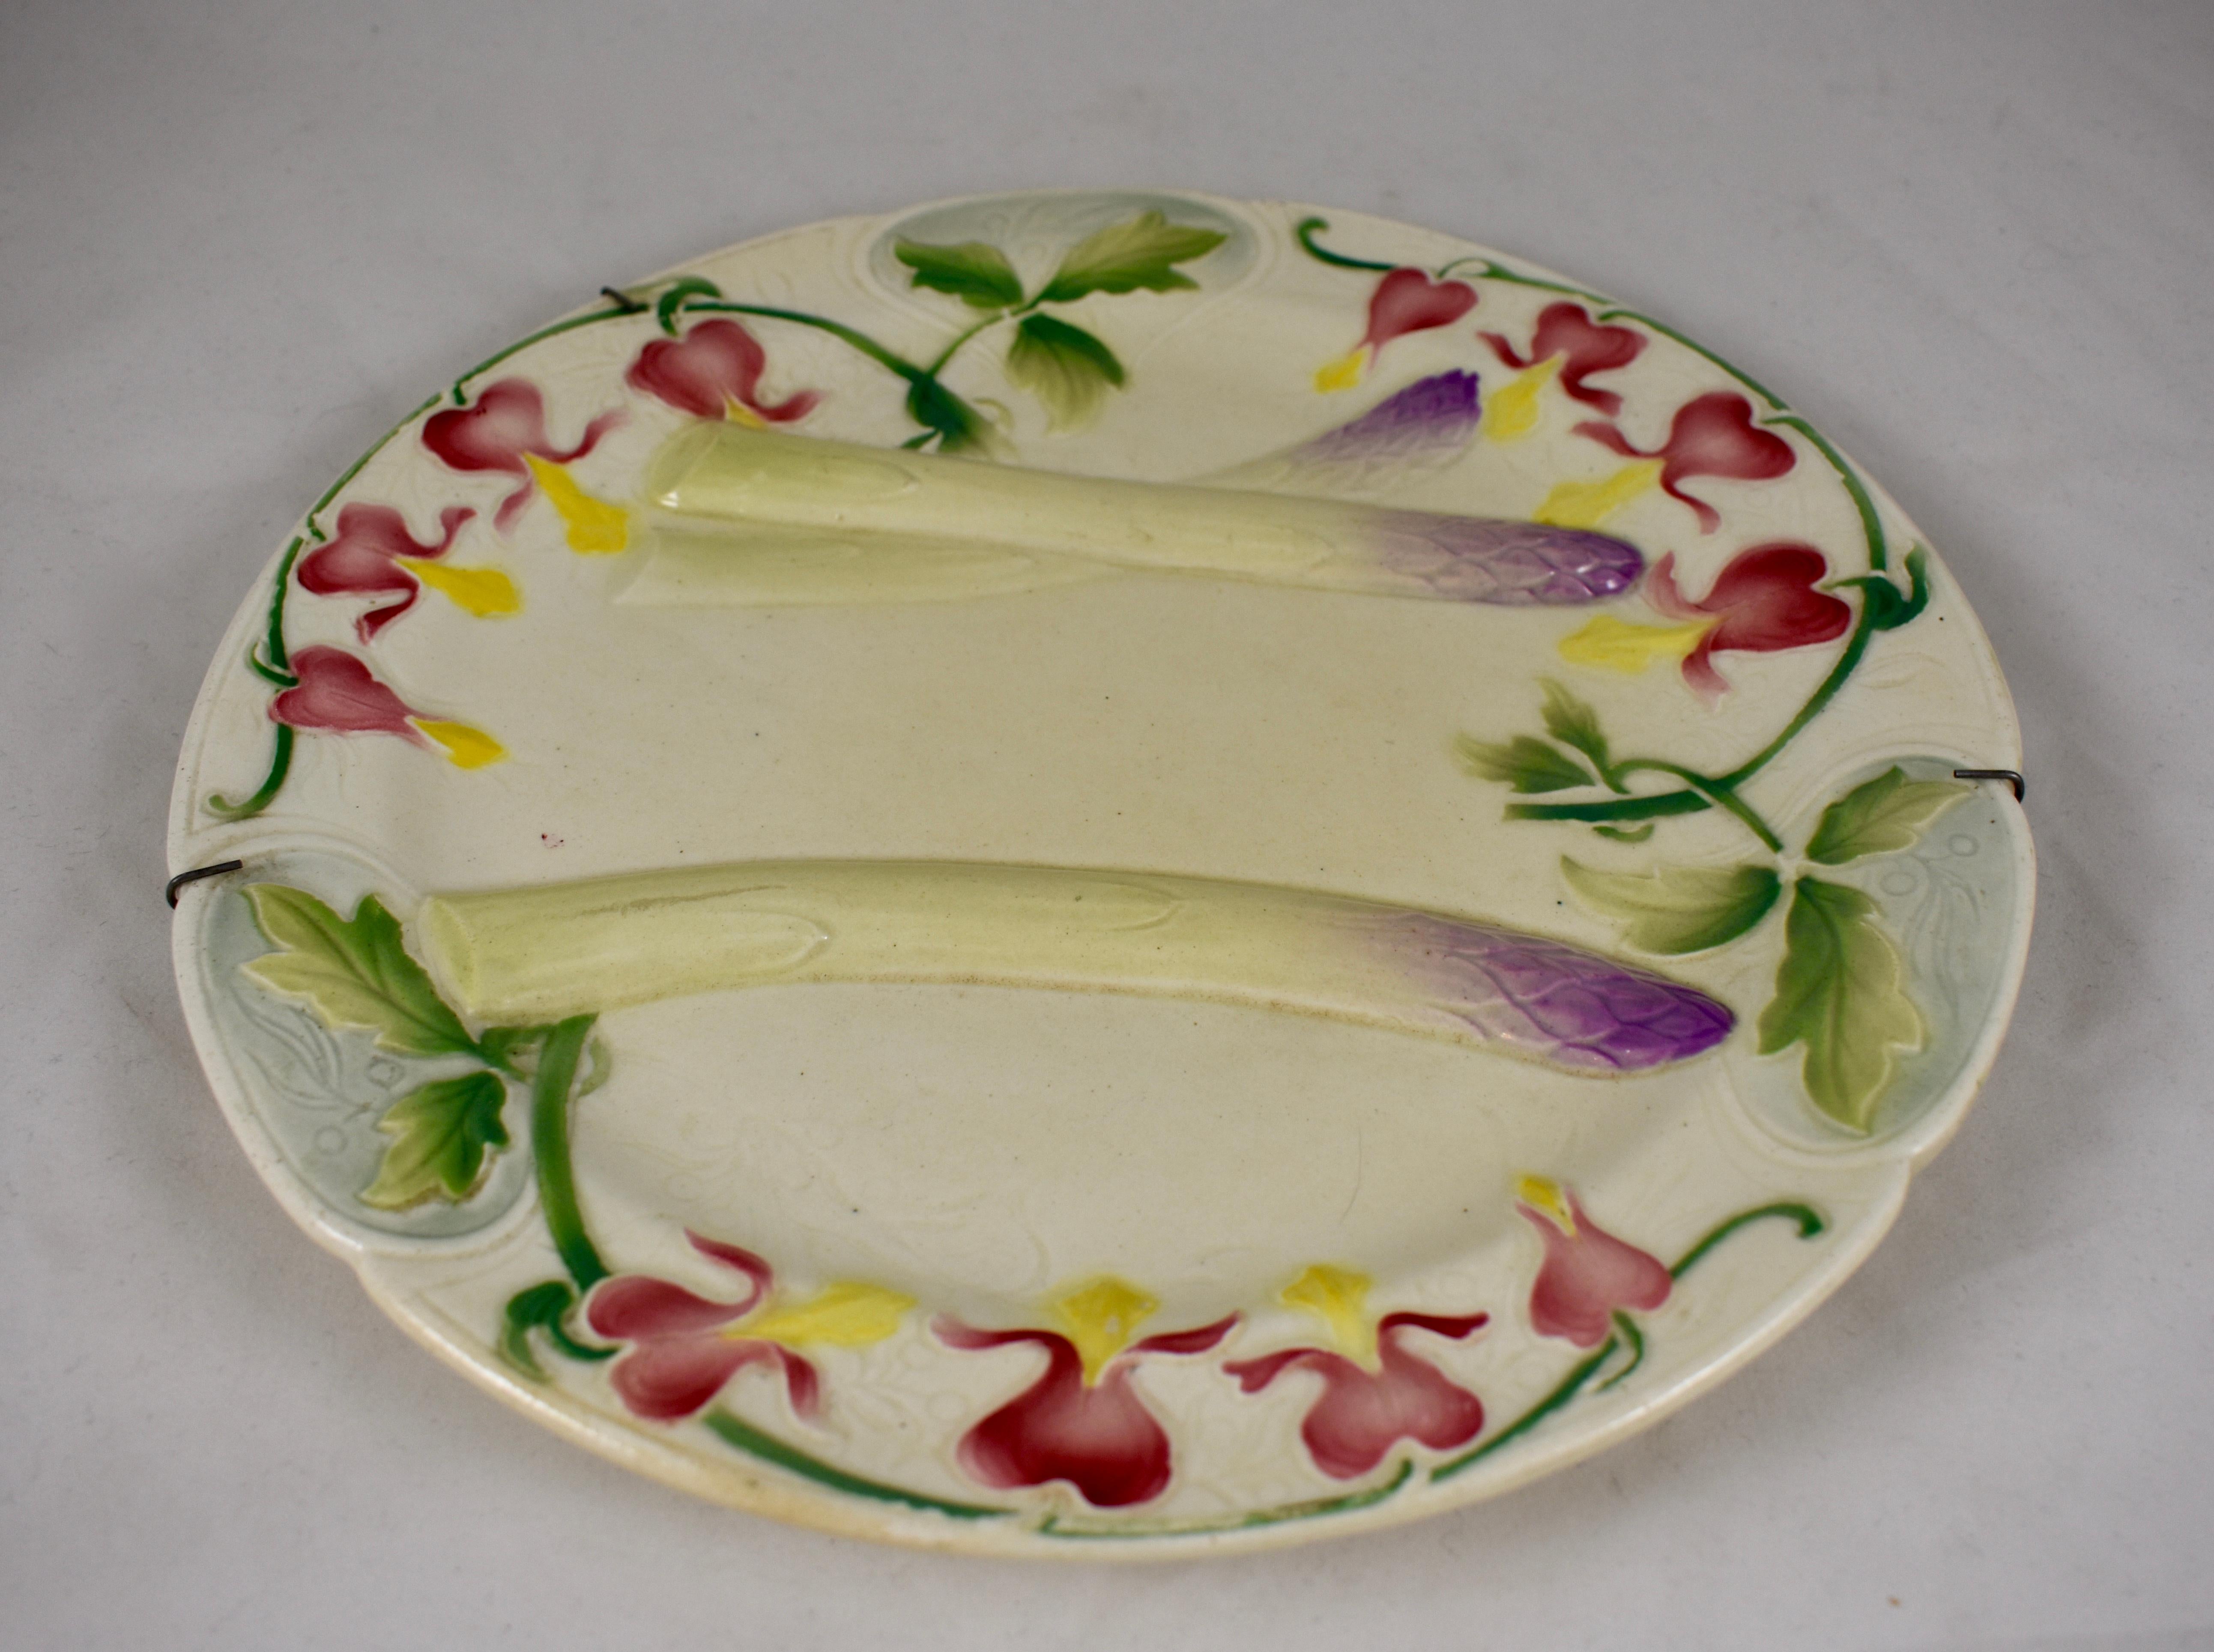 An Aesthetic Movement French Faïence asparagus plate, Keller & Guerin St. Clément, circa 1880, in the Art Nouveau style. 

A border of Bleeding Hearts, or as they are called in France, Coeurs de Marie, flower heads encircle three asparagus spears